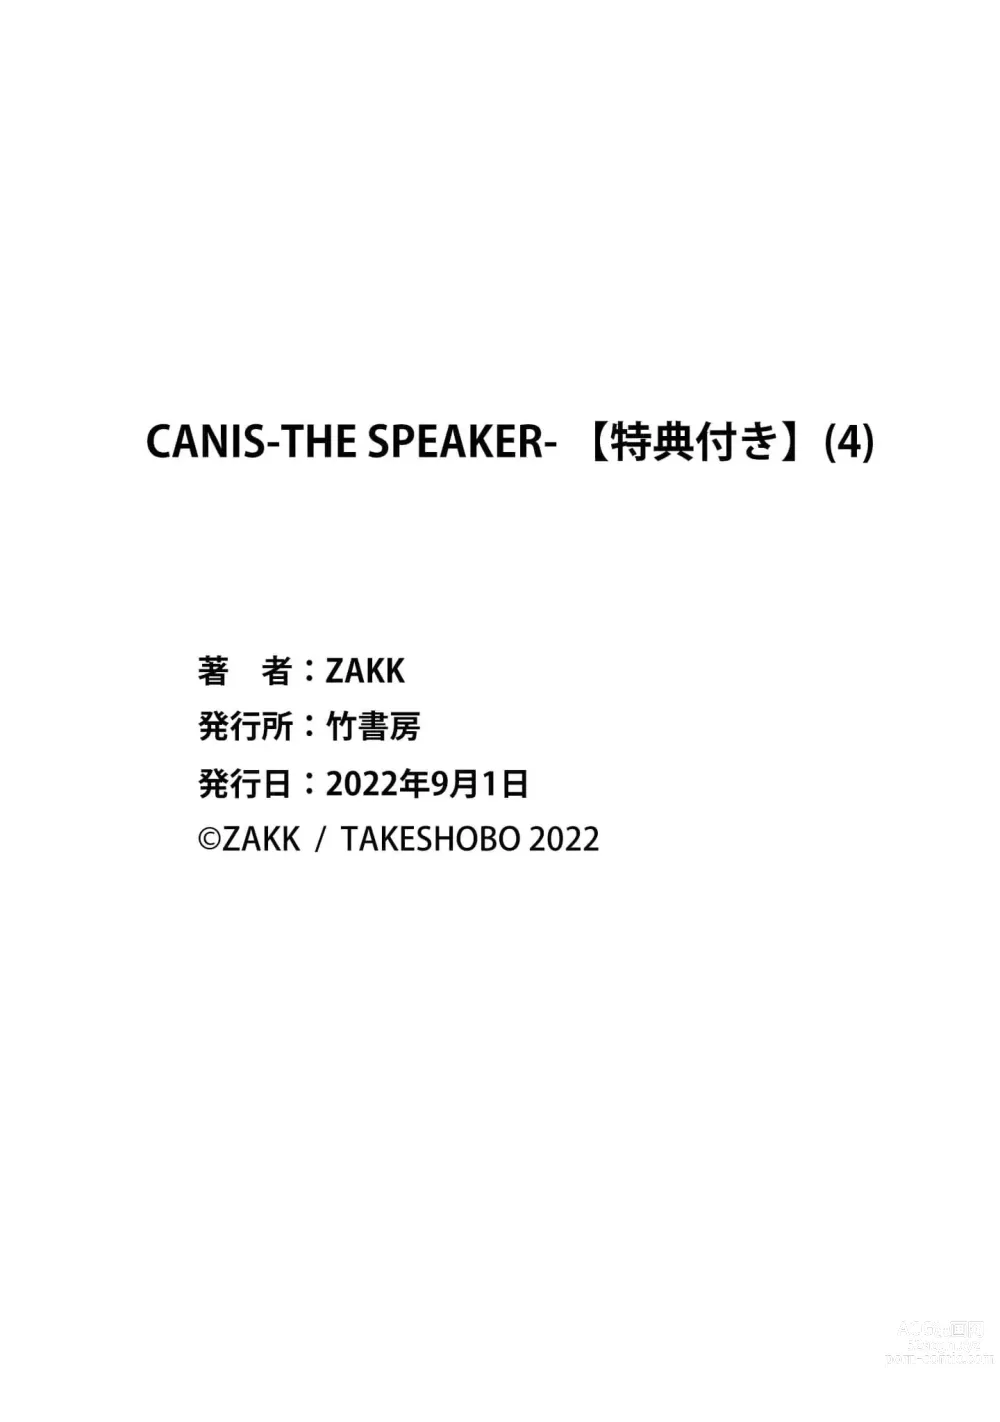 Page 228 of manga CANIS THE SPEAKER #4